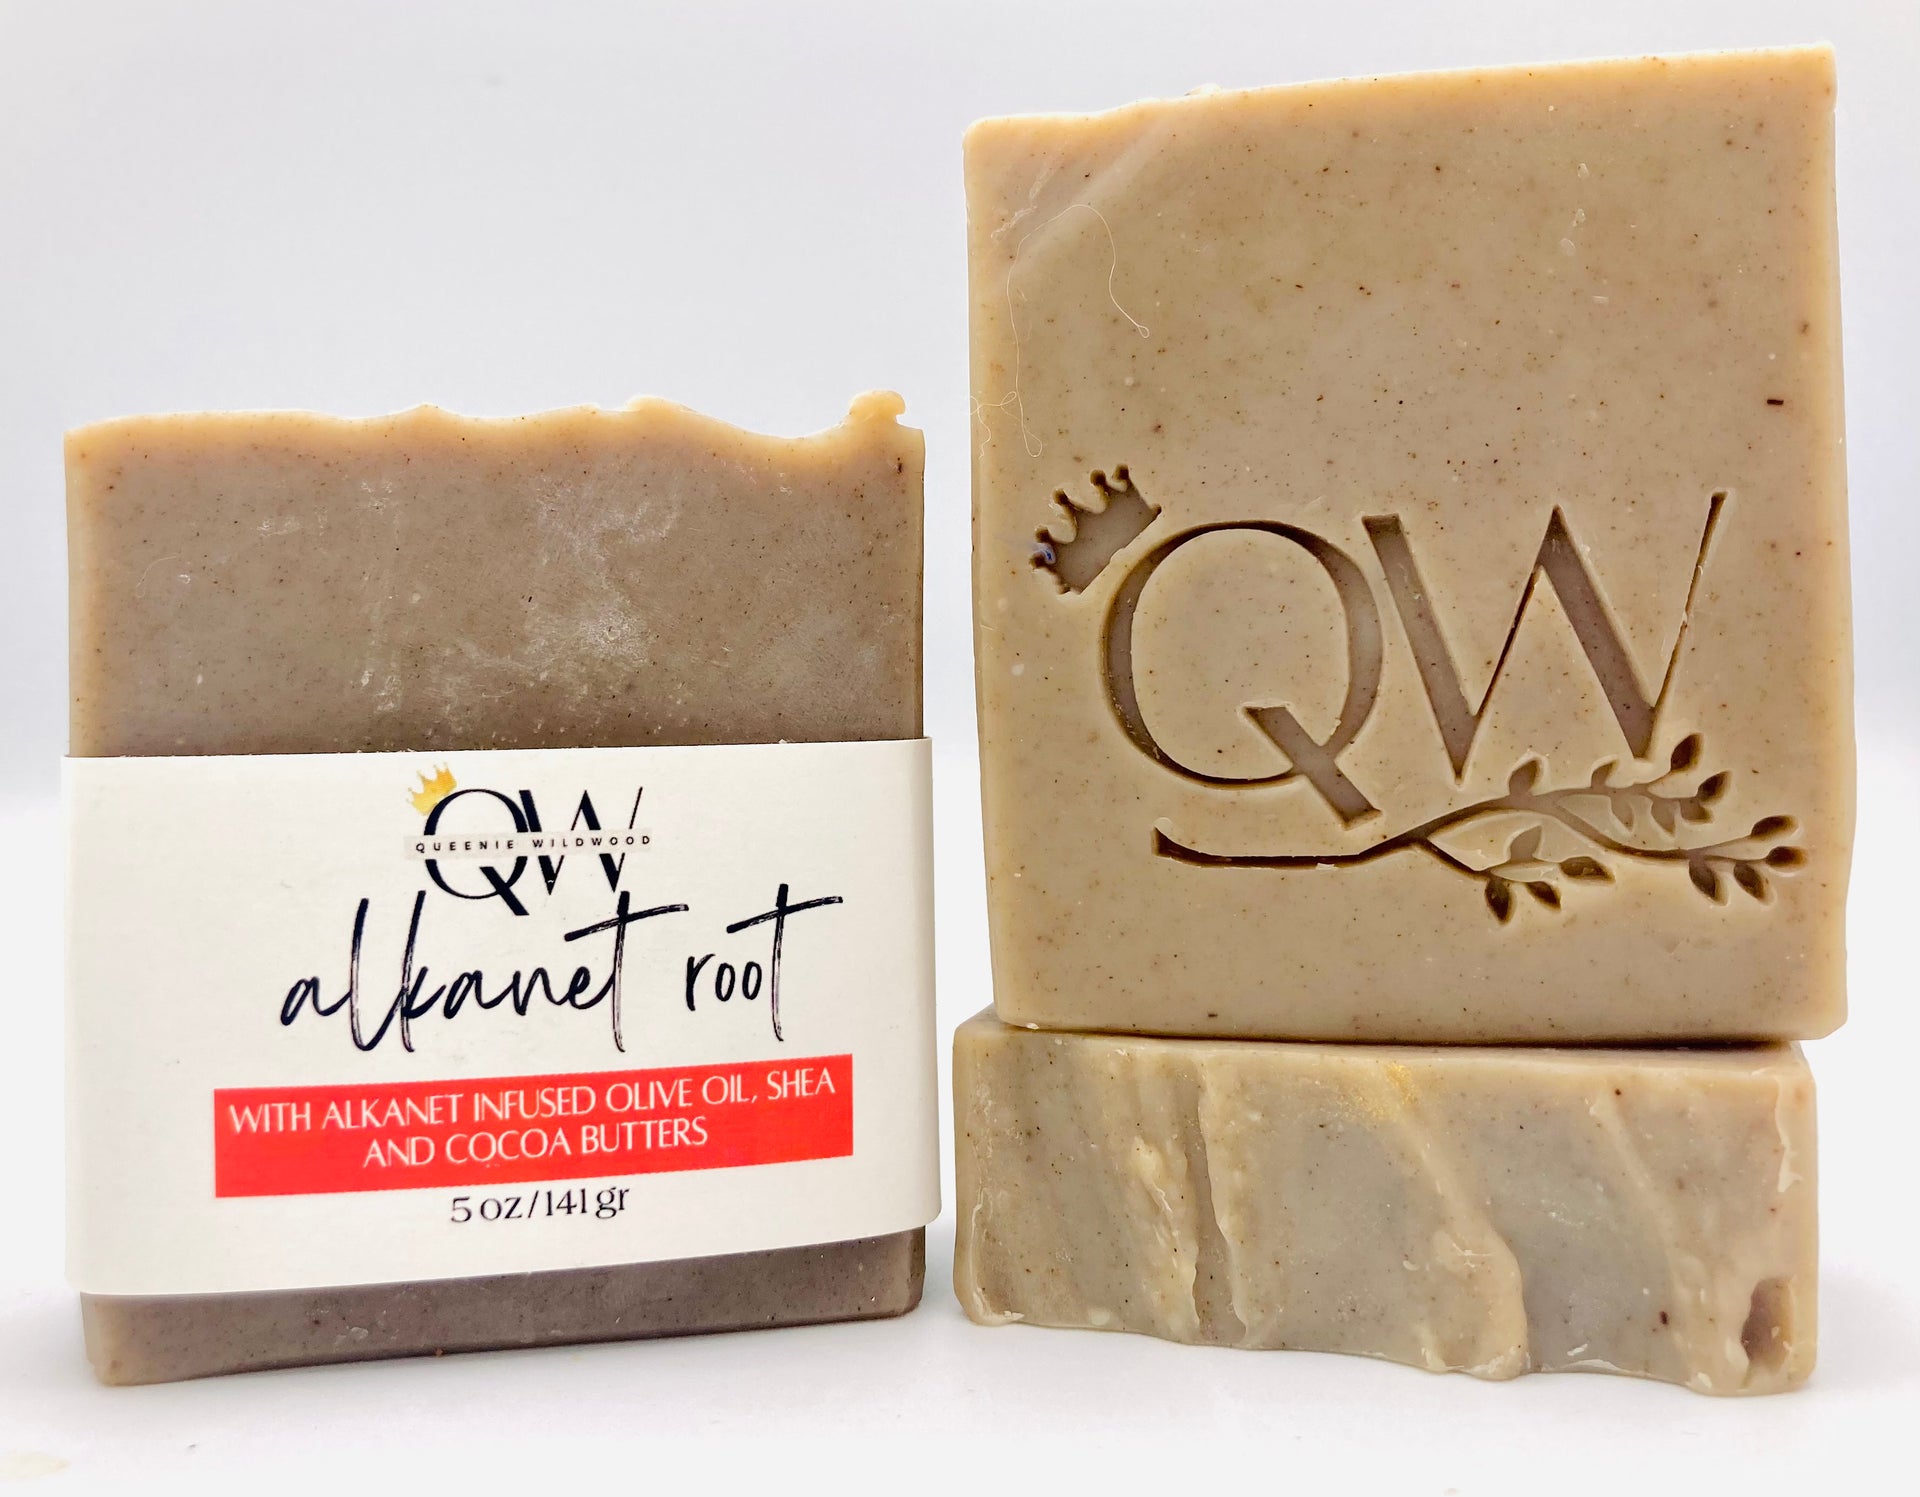 Alkanet Root, Wildharvested – Chagrin Valley Soap & Salve